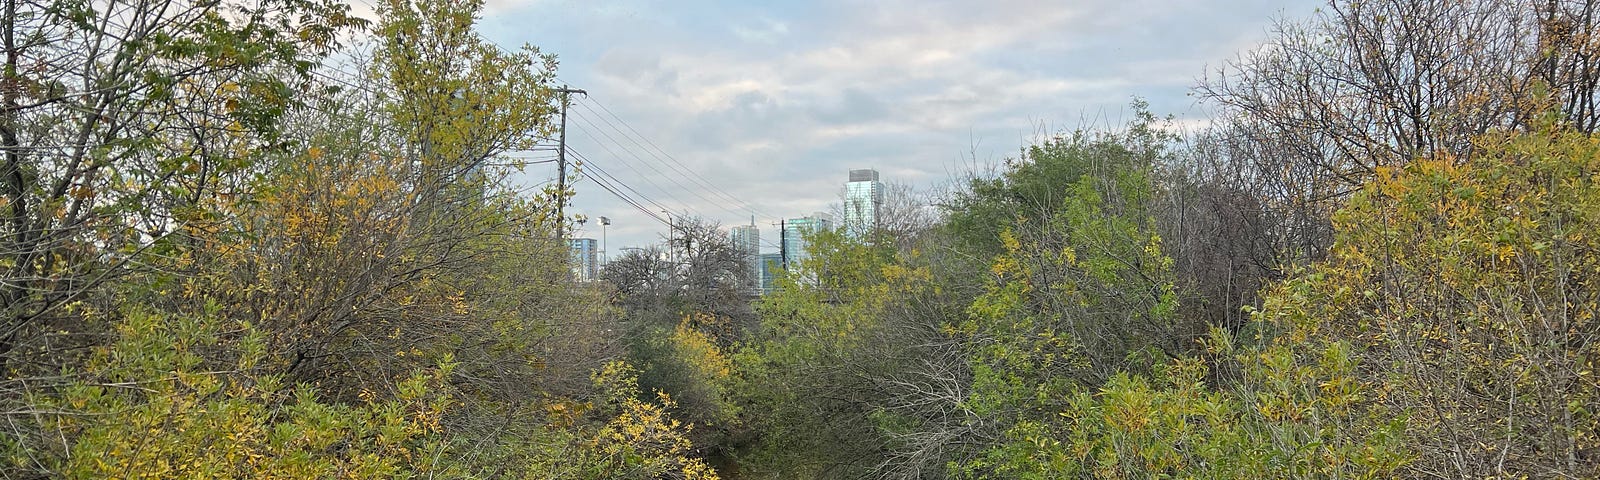 A photo of the Austin skyline through trees at Pease Park.